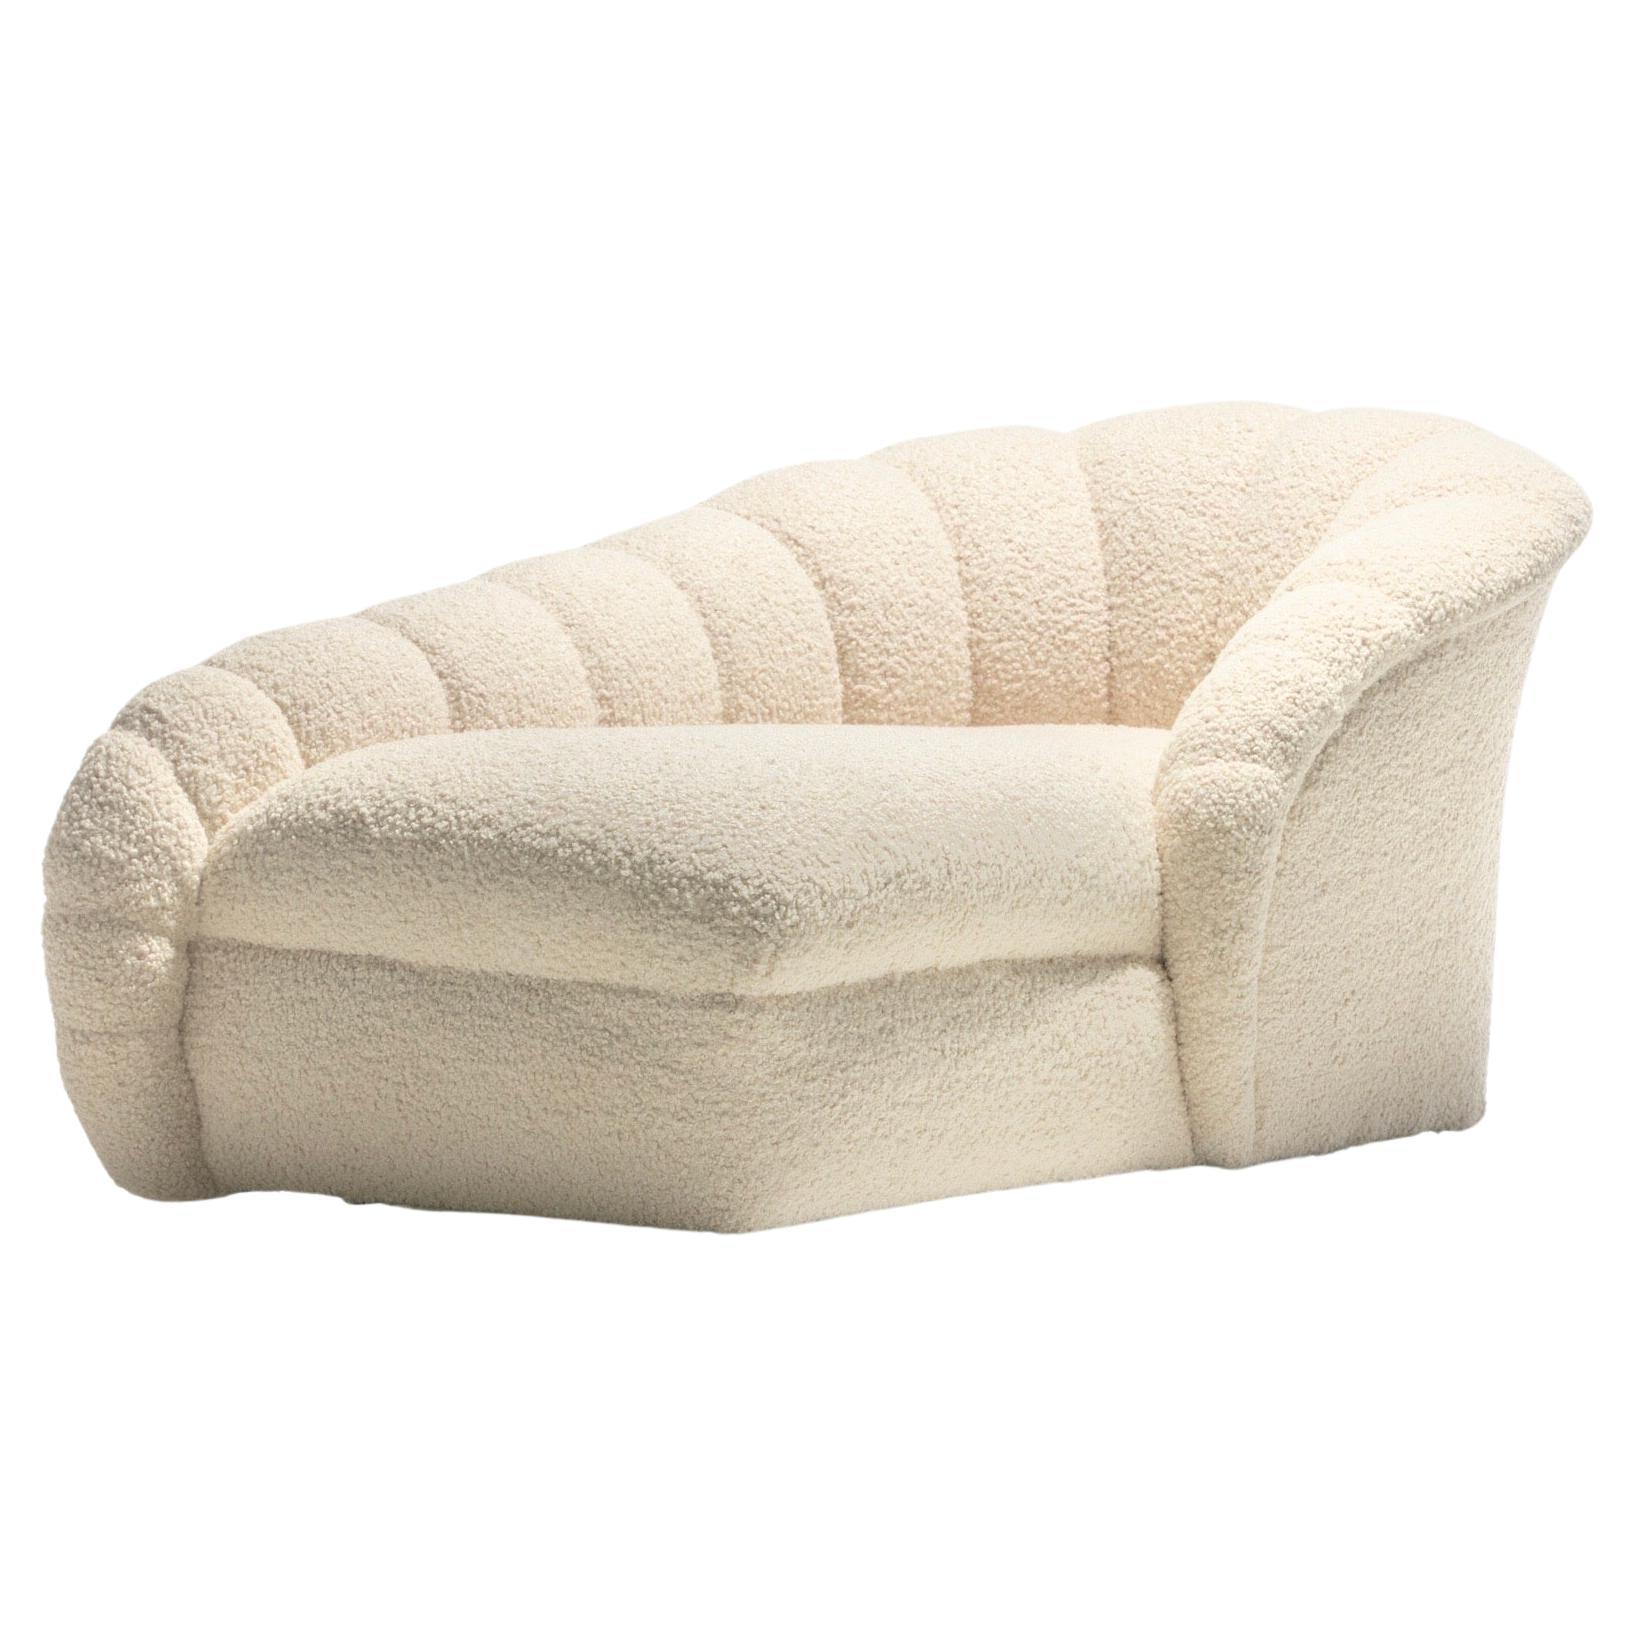 Vladimir Kagan Post Modern Clam Chaise Lounge in Soft Ivory White Bouclé 1980s